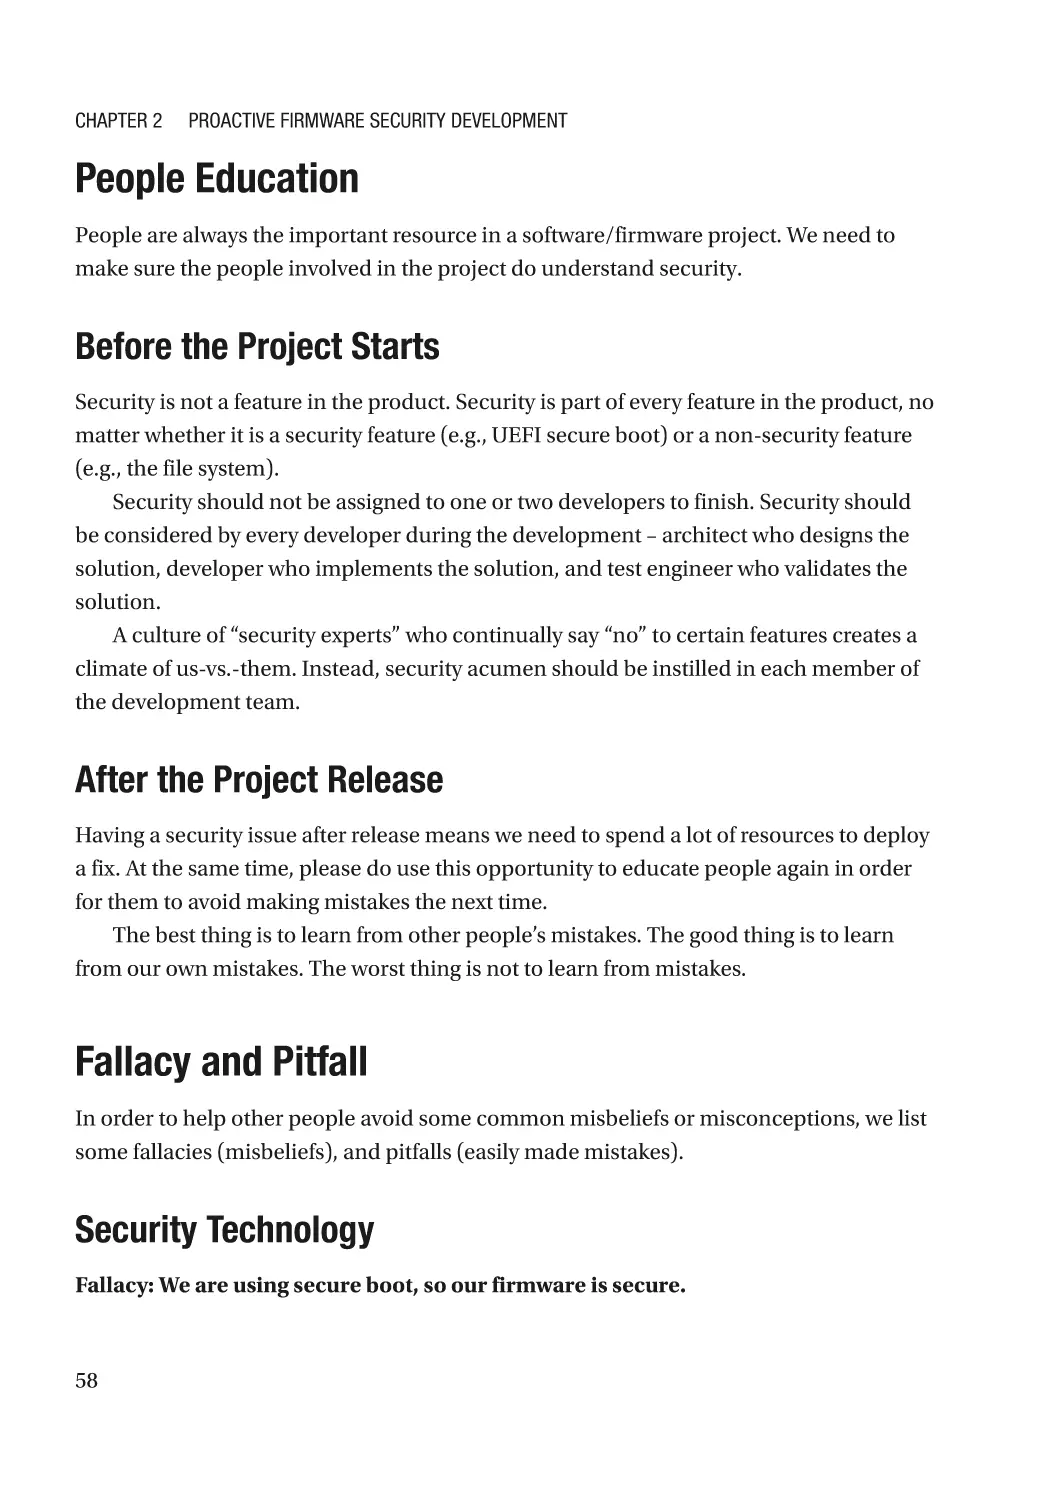 People Education
Before the Project Starts
After the Project Release
Fallacy and Pitfall
Security Technology